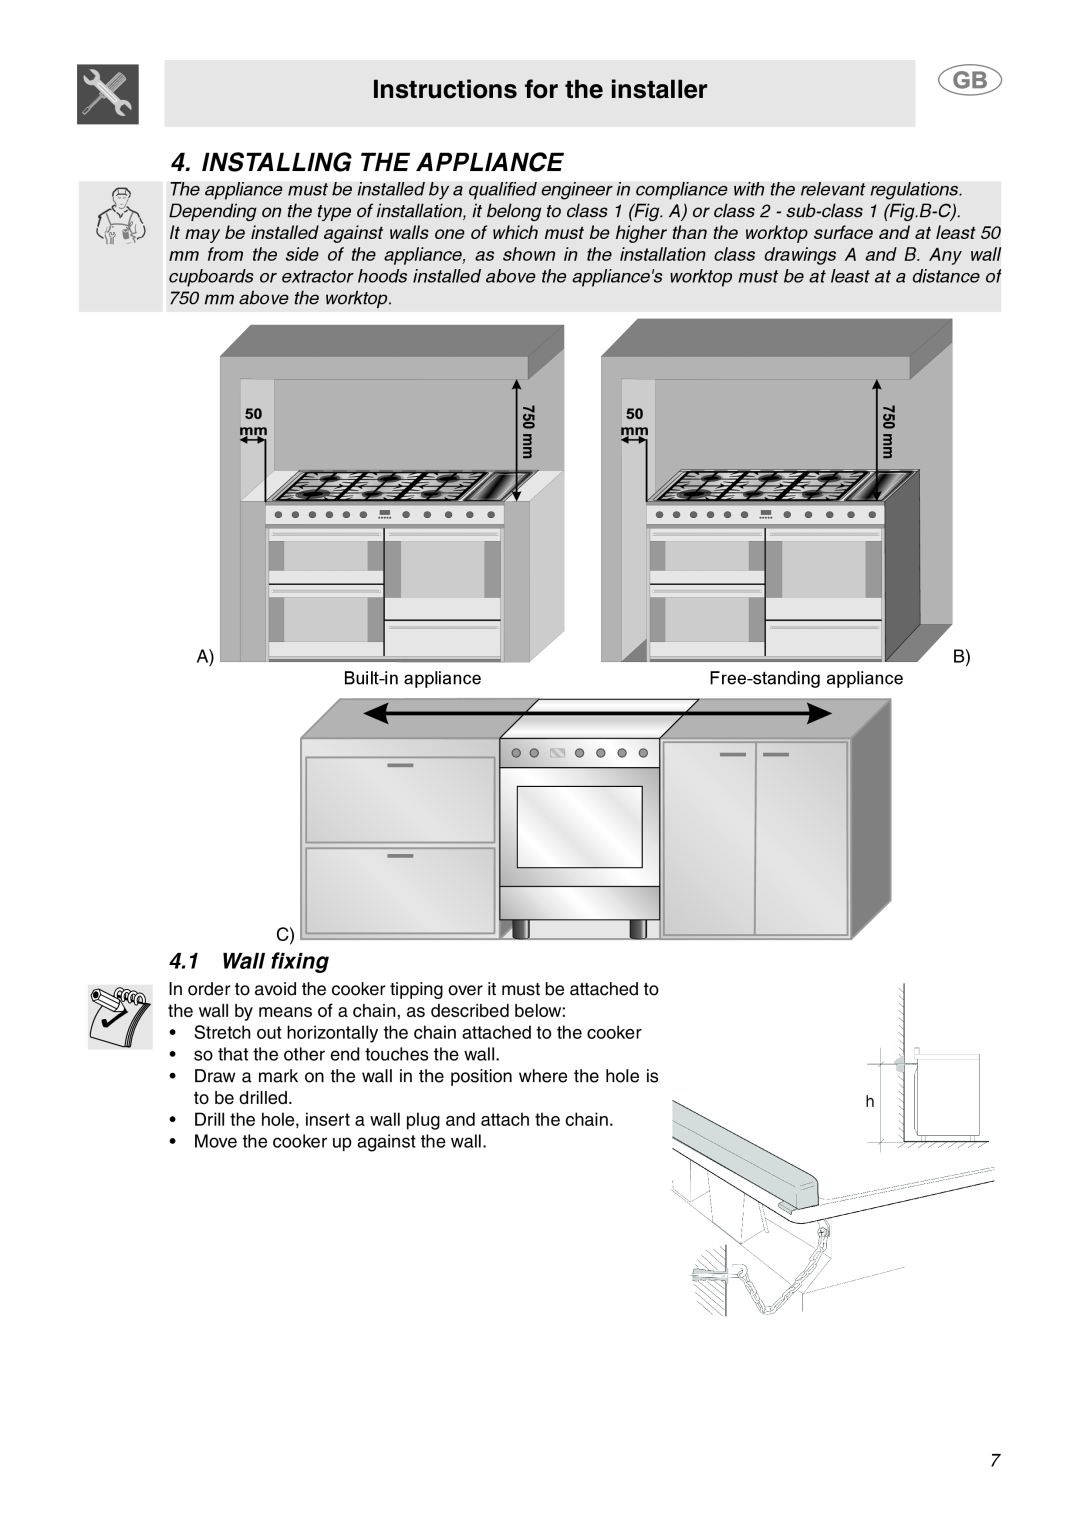 Smeg SY4110 manual Instructions for the installer, Installing The Appliance, Wall fixing 